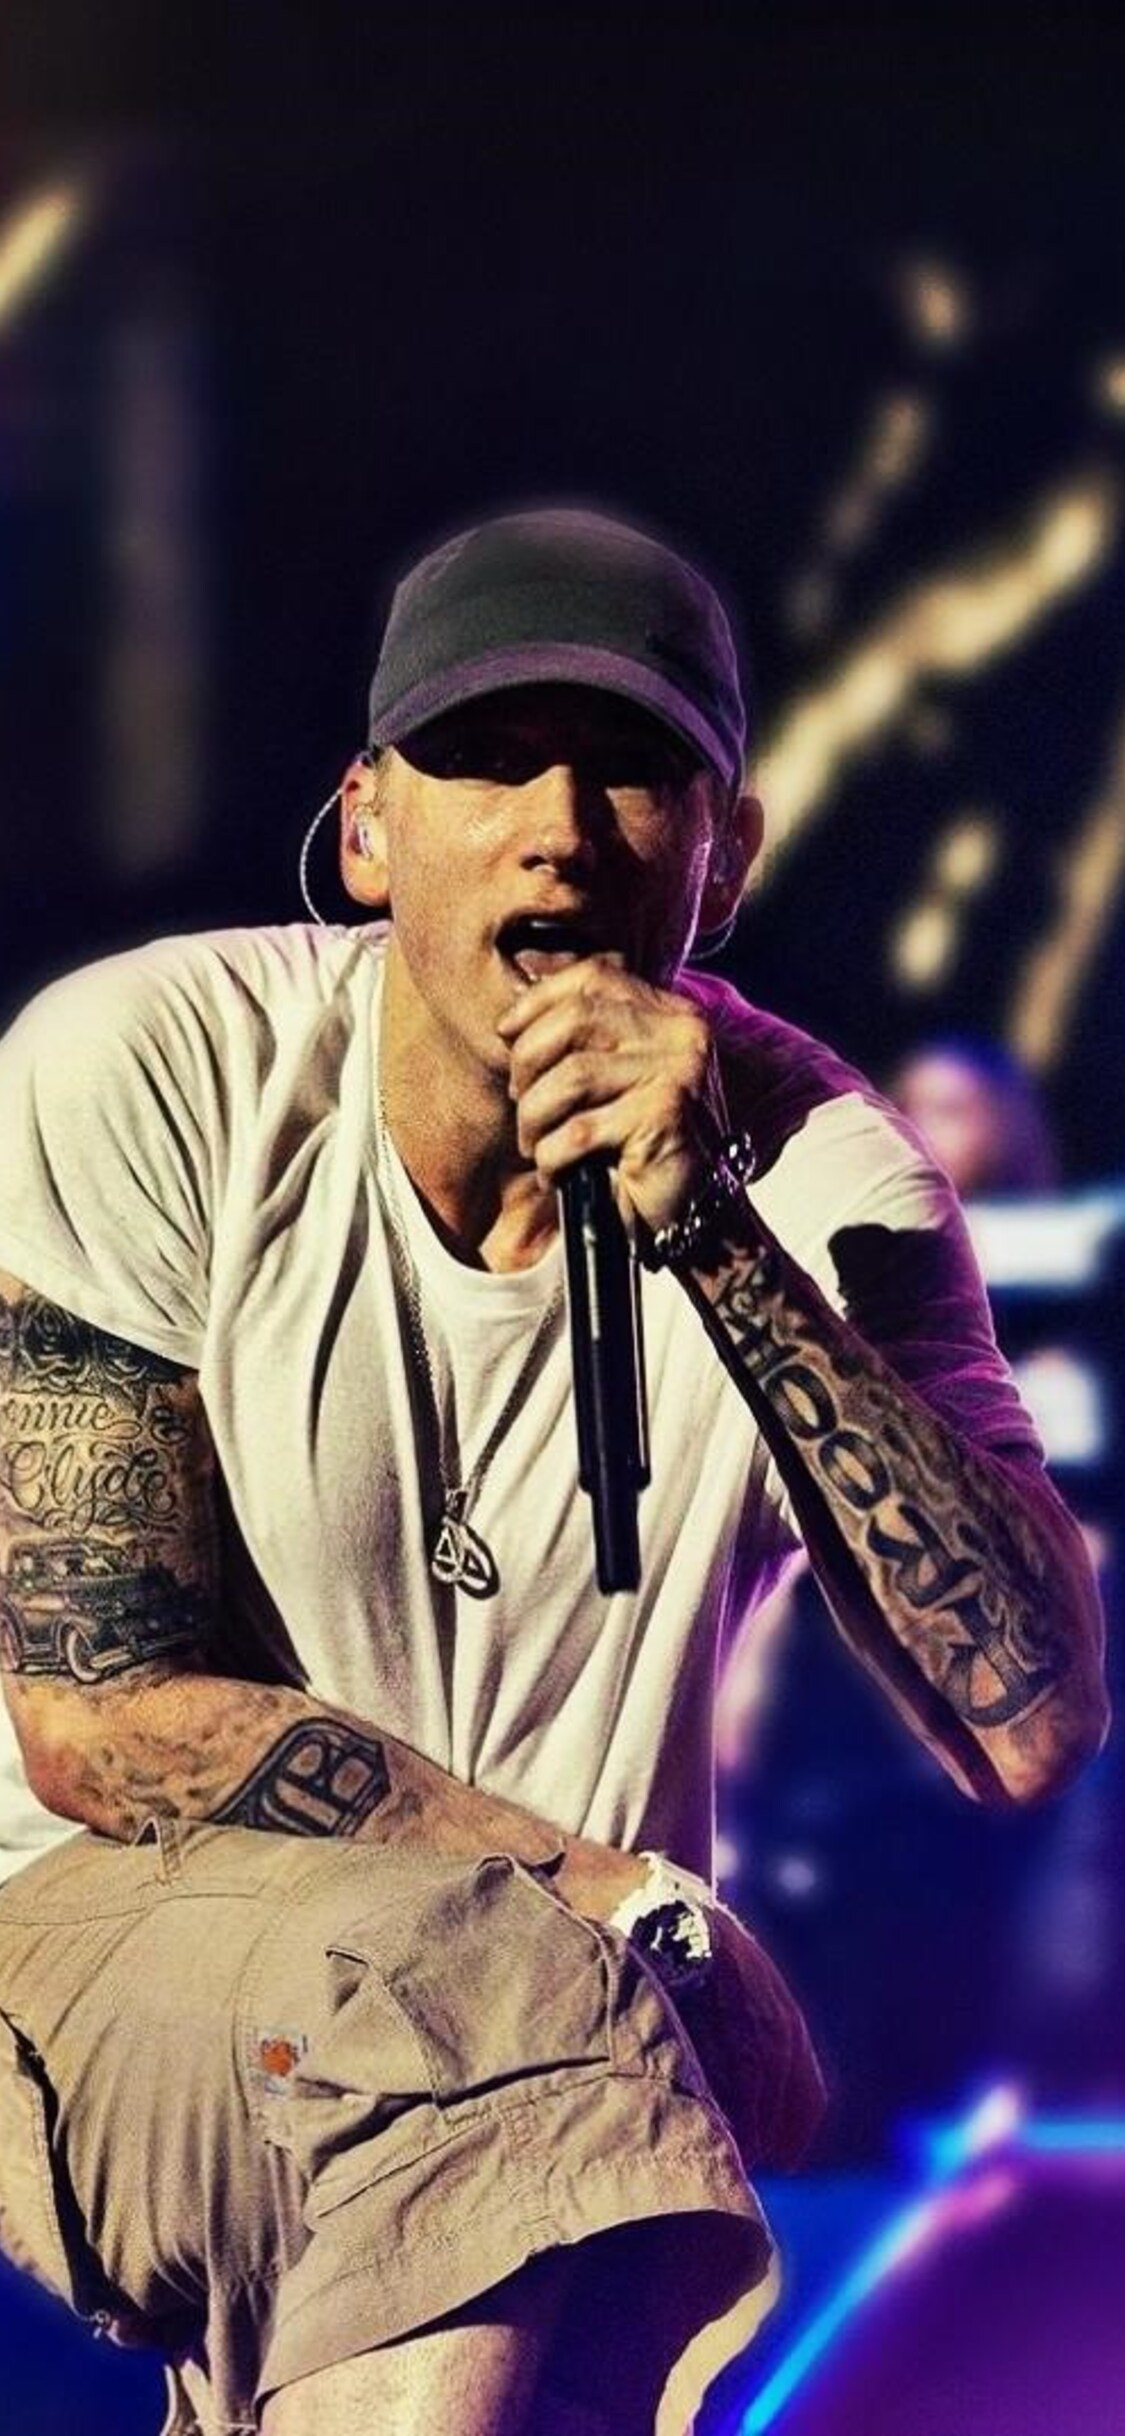 750x1334 Eminem Wallpapers for Apple IPhone 6 6S 7 8 Retina HD